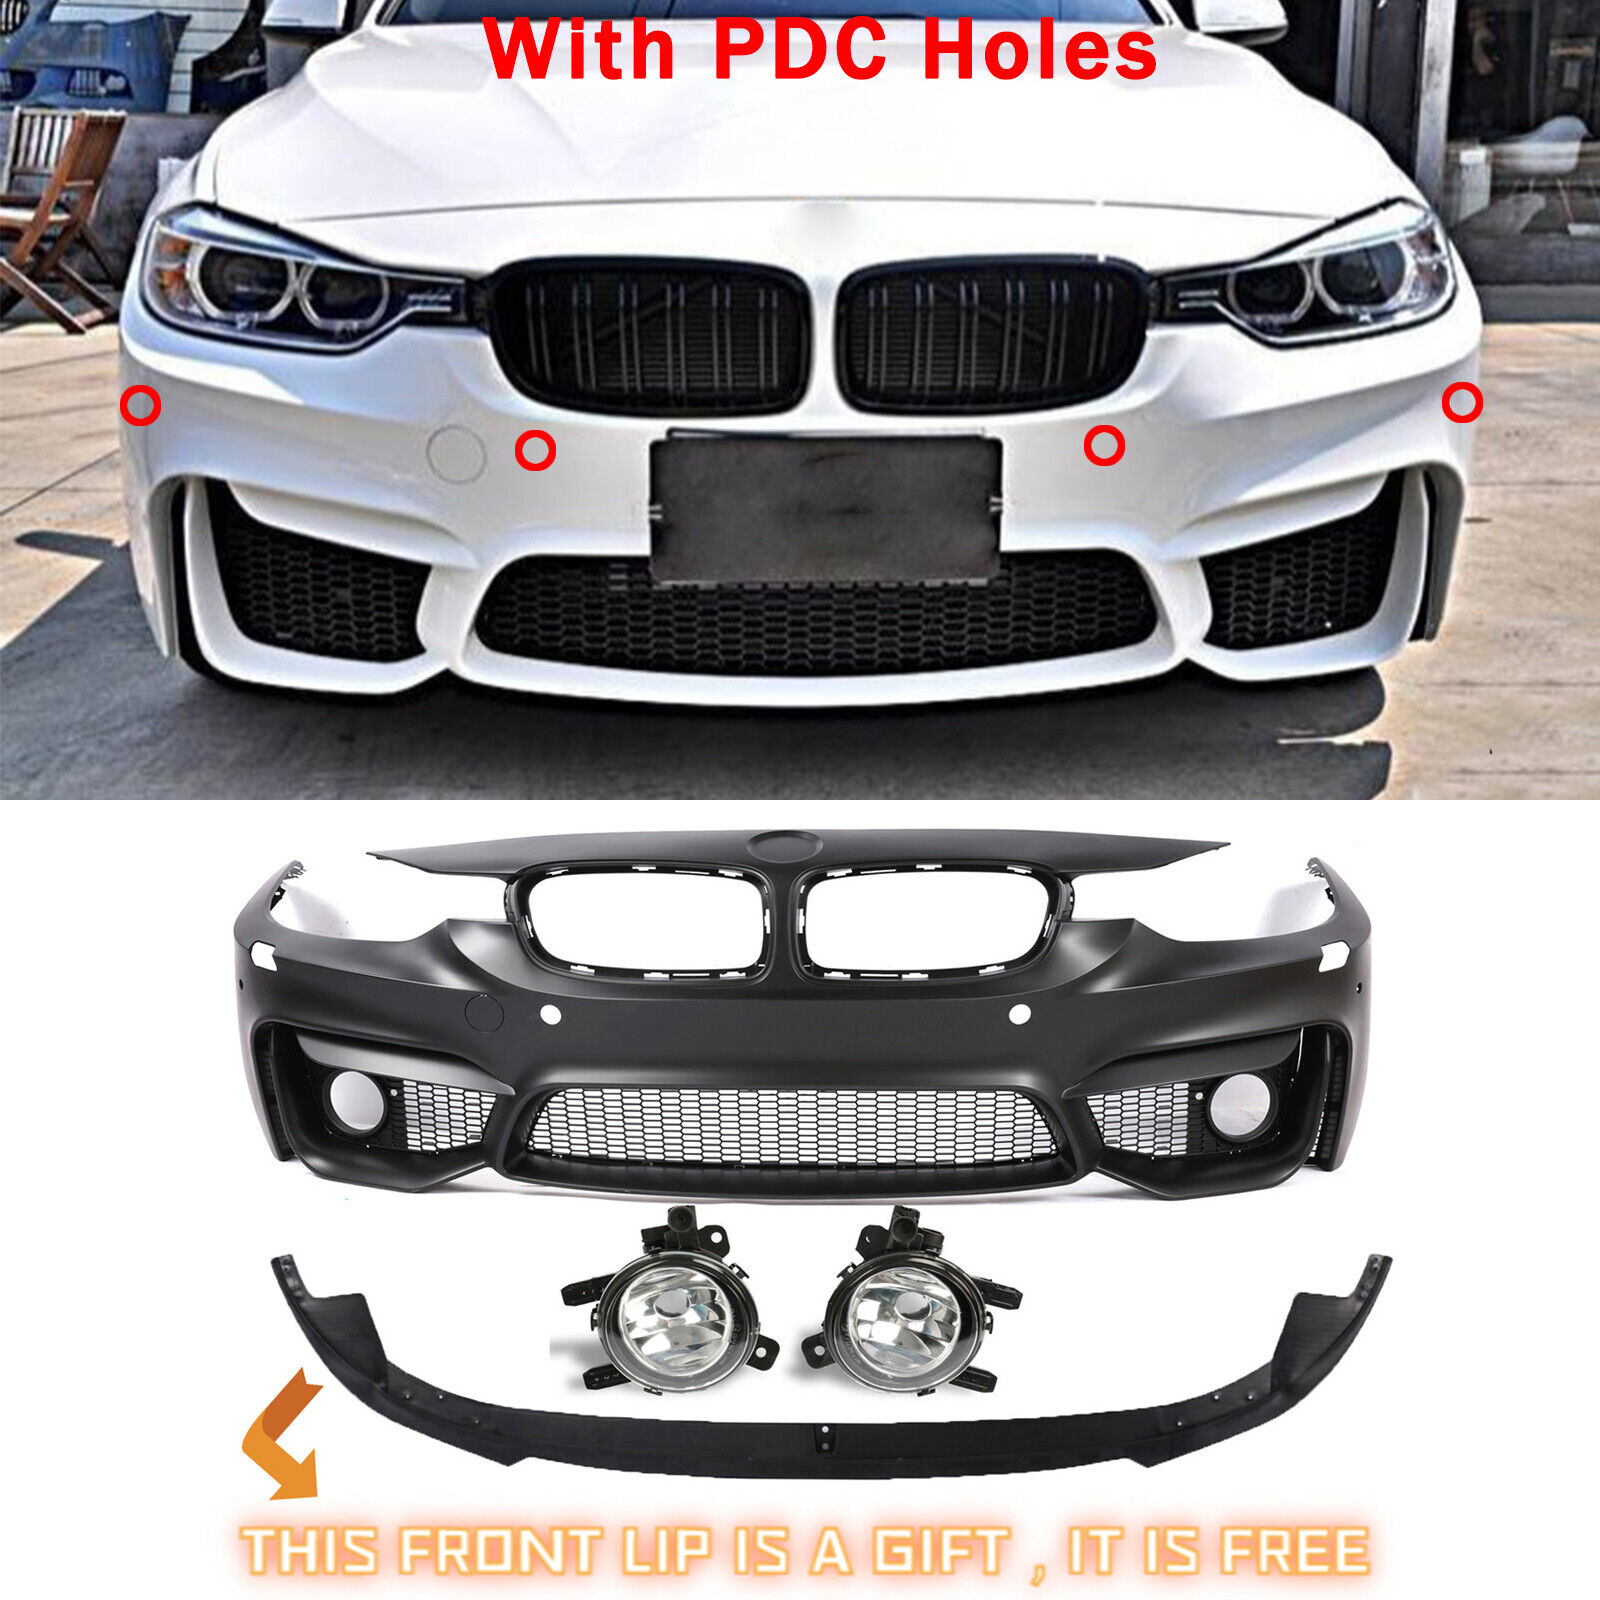 M3 Style Bumper Cover For BMW F30 +Fog light+Performance Lip+W/PDC 2012-2018